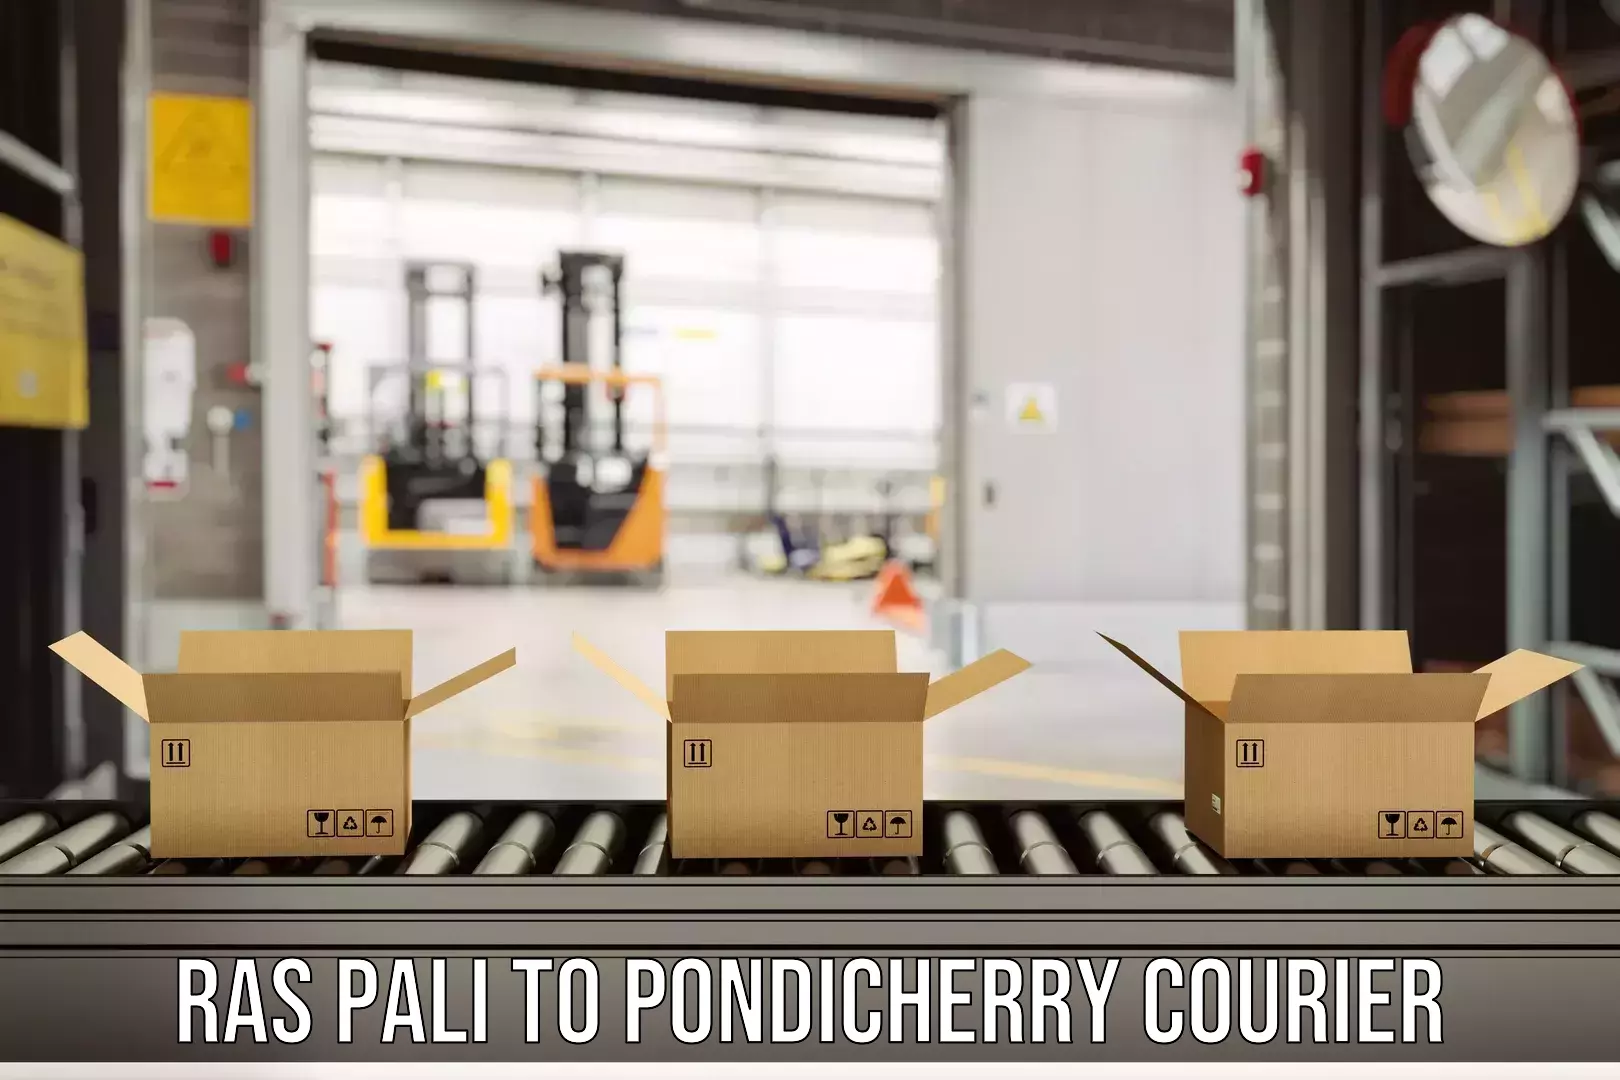 Expedited parcel delivery Ras Pali to Pondicherry